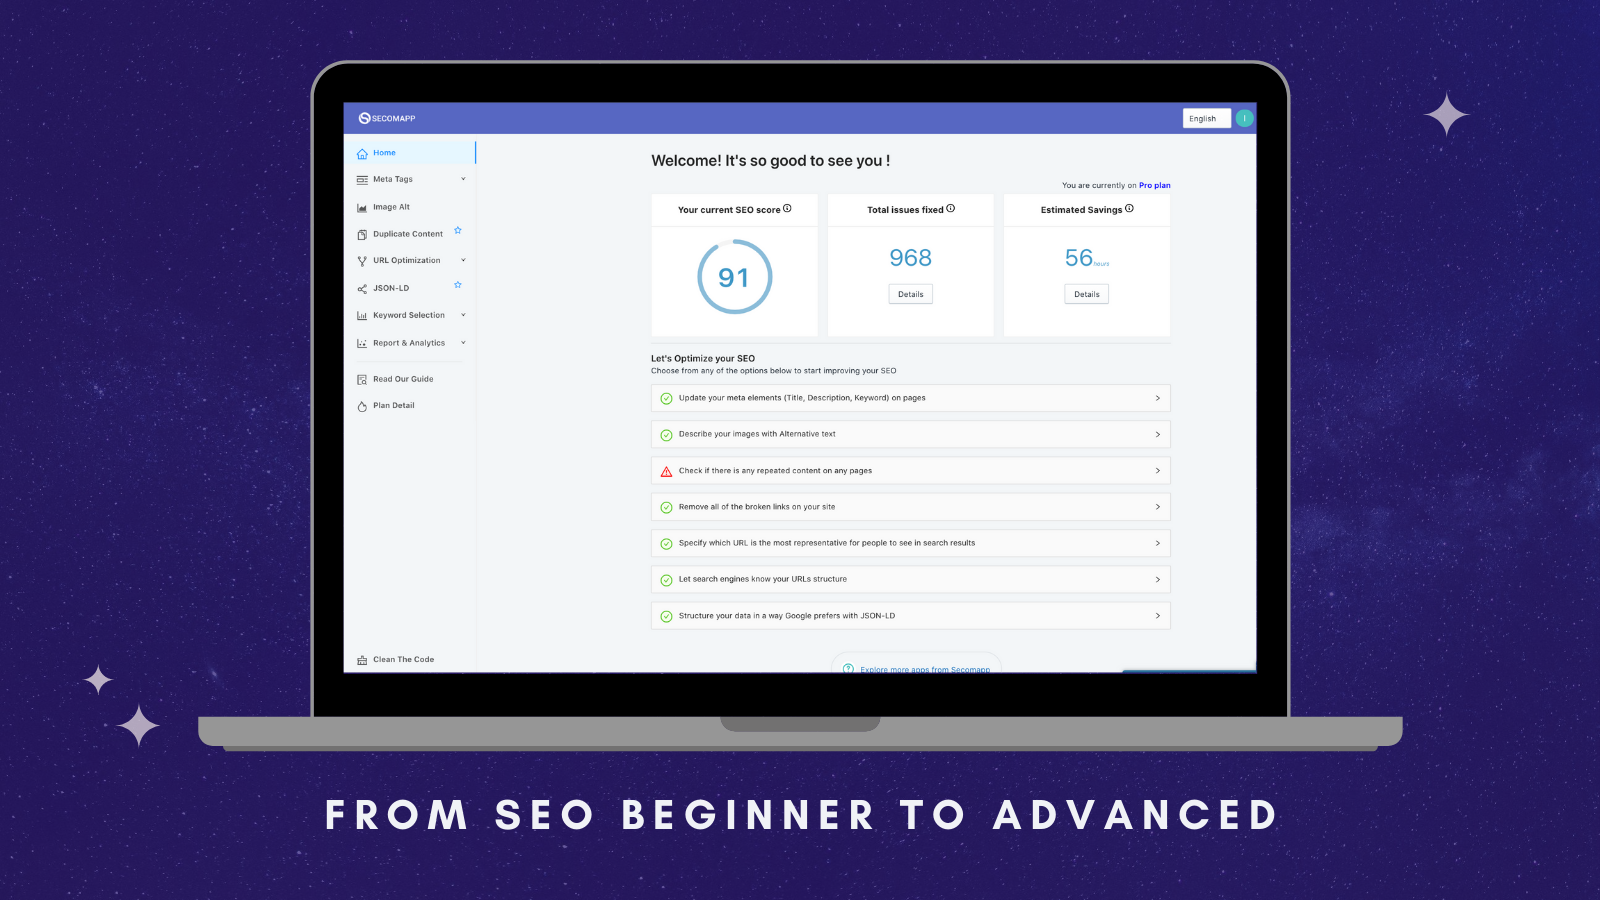 9. SEO Booster ‐ SEO Marketing by Secomapp